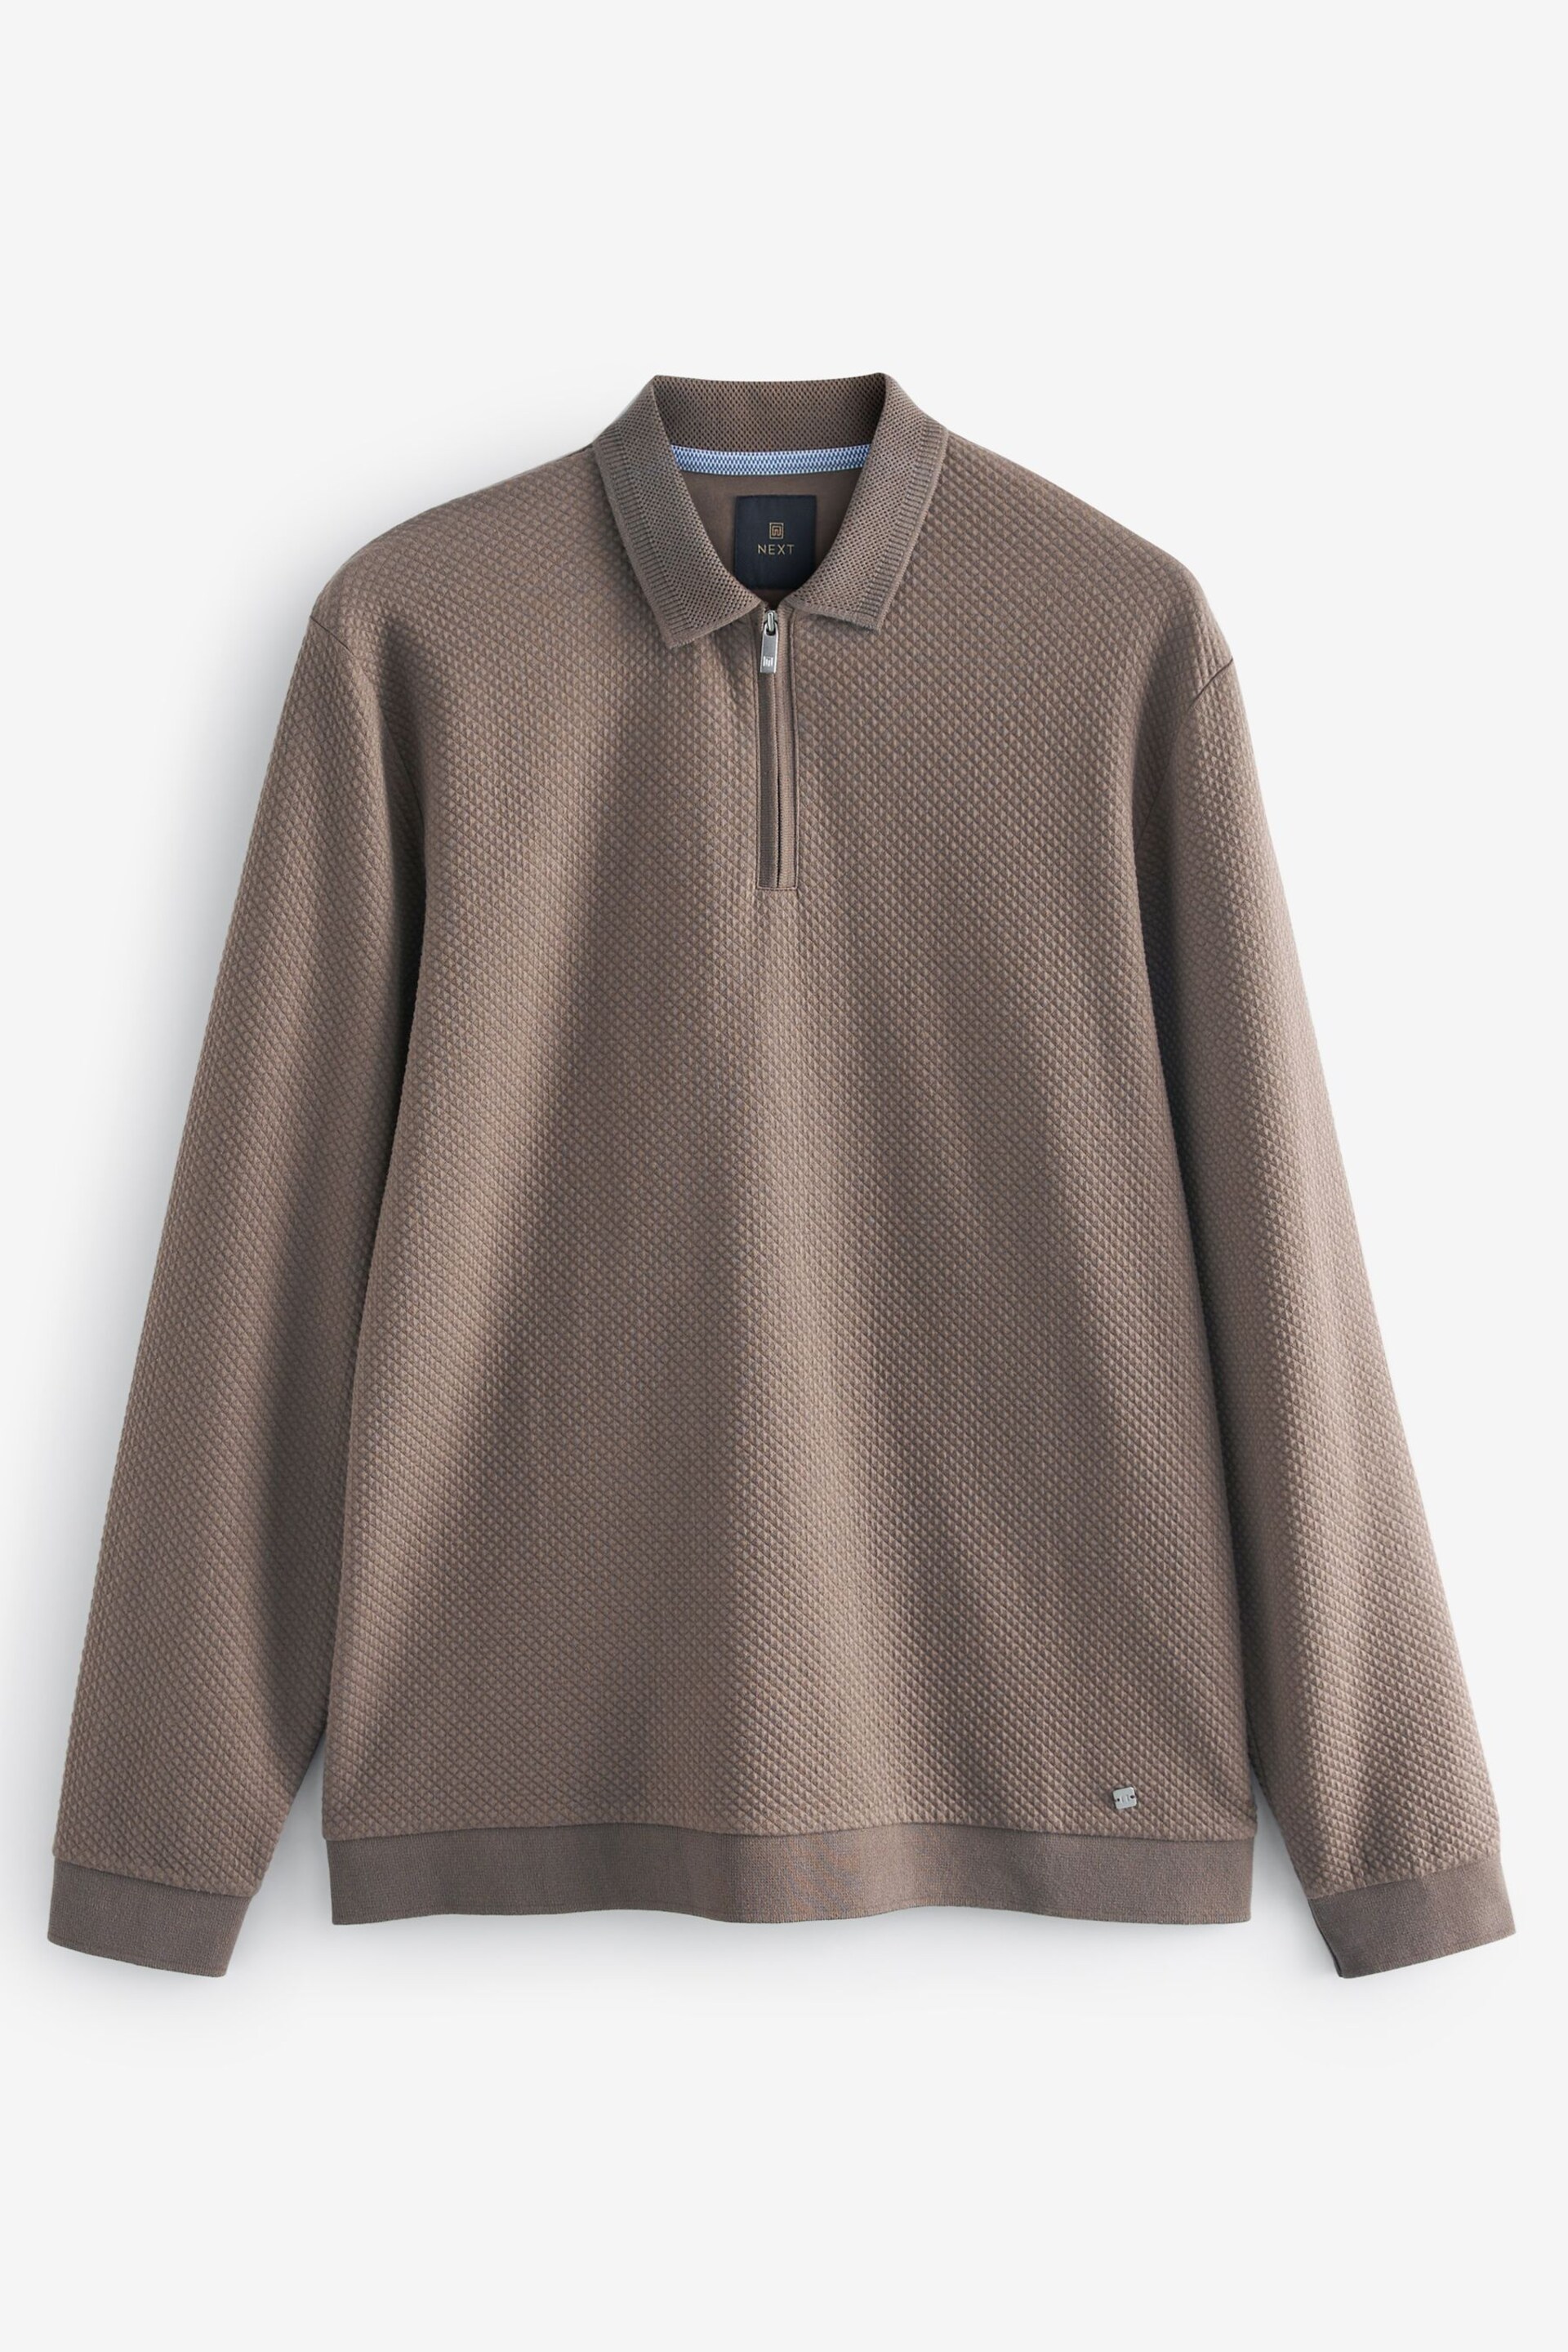 Neutral Brown Textured Long Sleeve Polo Shirt - Image 7 of 9